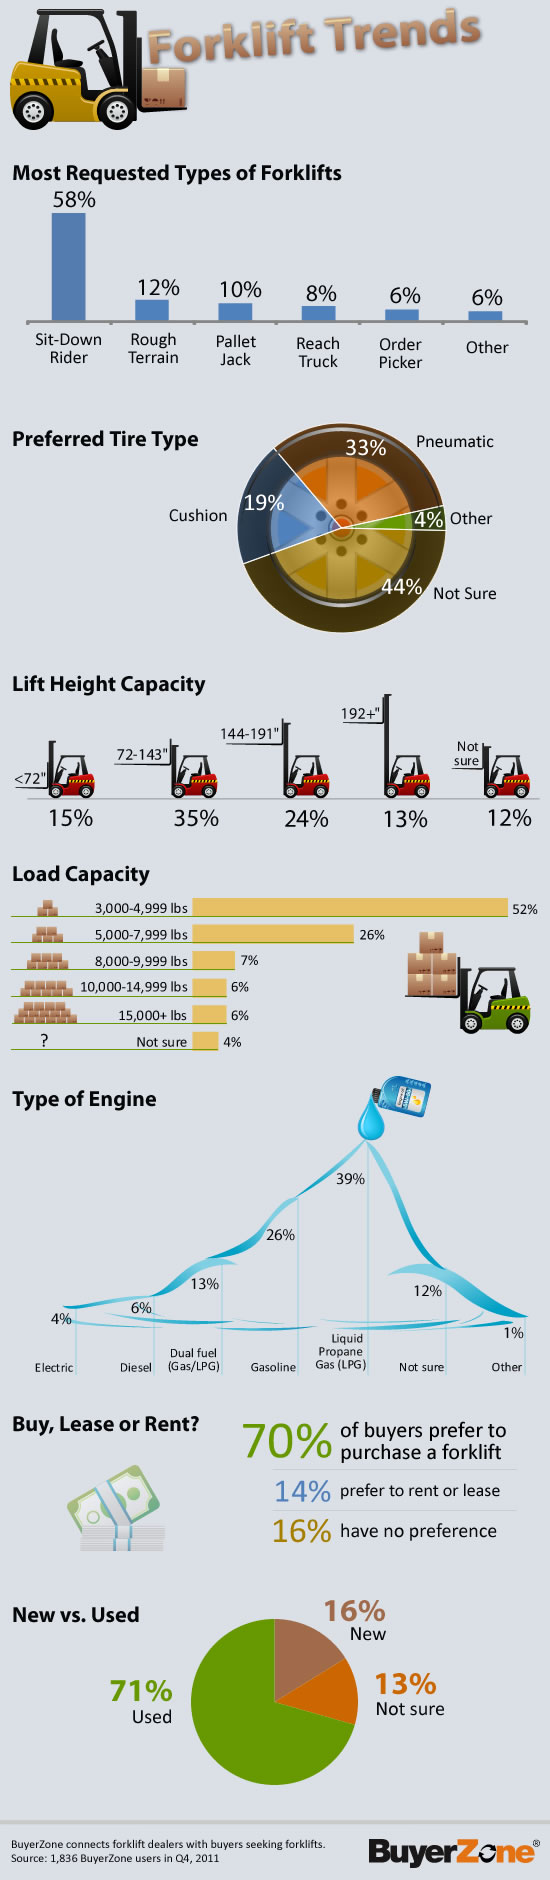 Forklift trends infographic